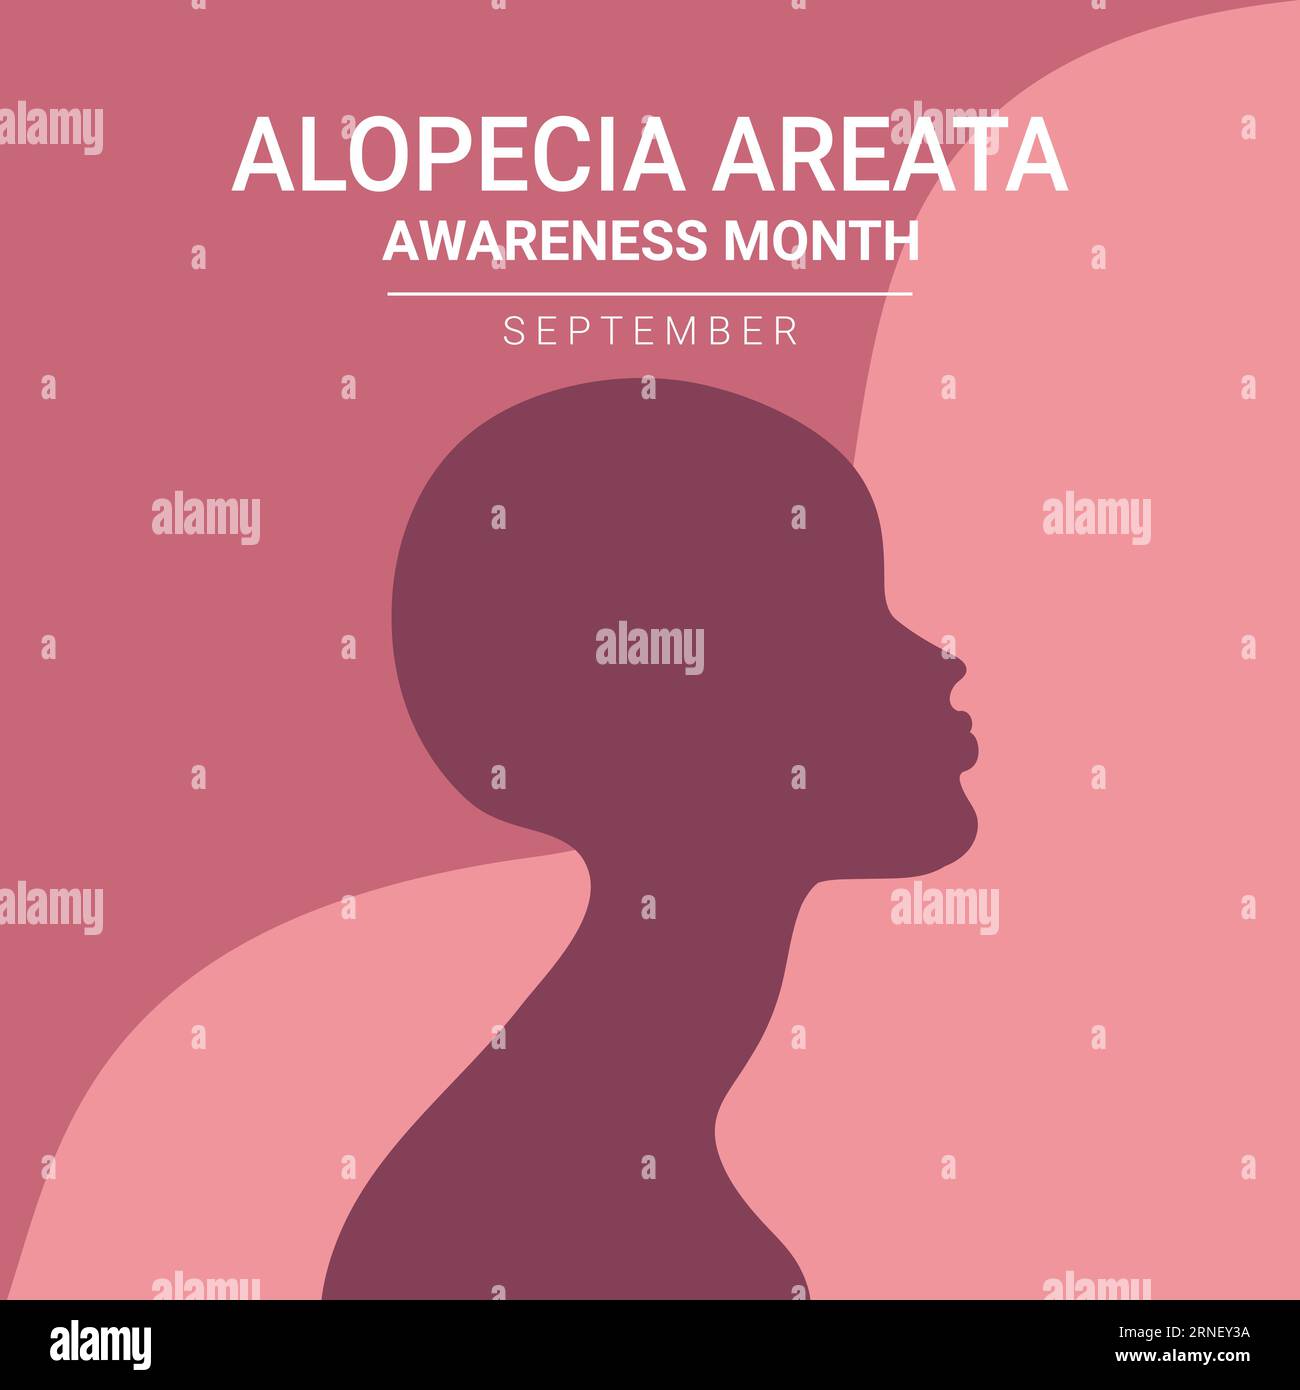 Alopecia awareness month poster. Woman with bald head silhouette. Vector illustration Stock Vector